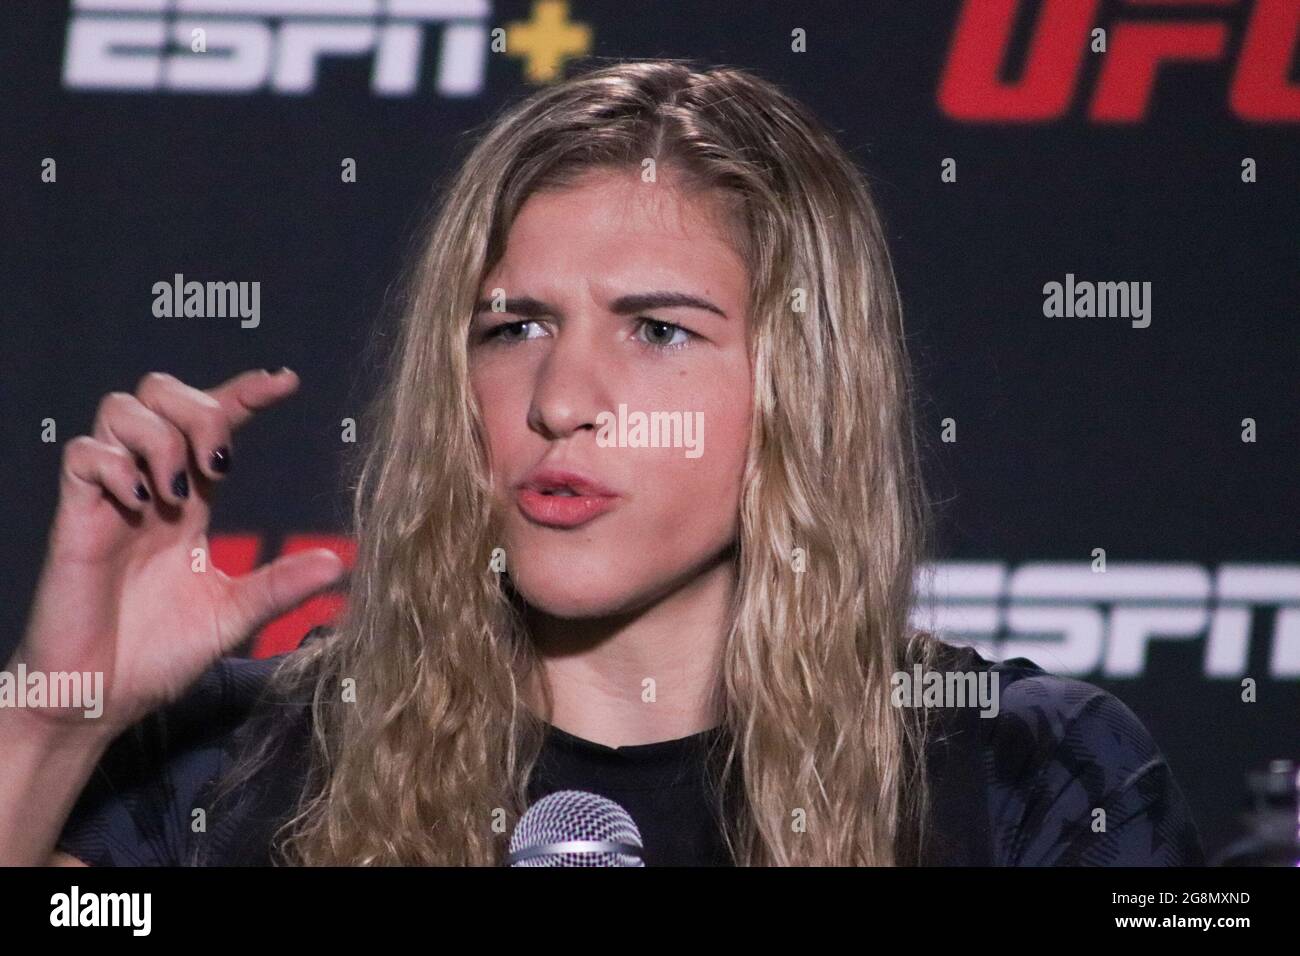 Las Vegas, Nevada, United States. 21st July, 2021. LAS VEGAS, NV - JULY 21: Miranda Maverick interacts with media during the UFC Vegas 32: Media Day at UFC Apex on July 21, 2021 in Las Vegas, Nevada, United States. (Photo by Diego Ribas/PxImages) Credit: Px Images/Alamy Live News Stock Photo